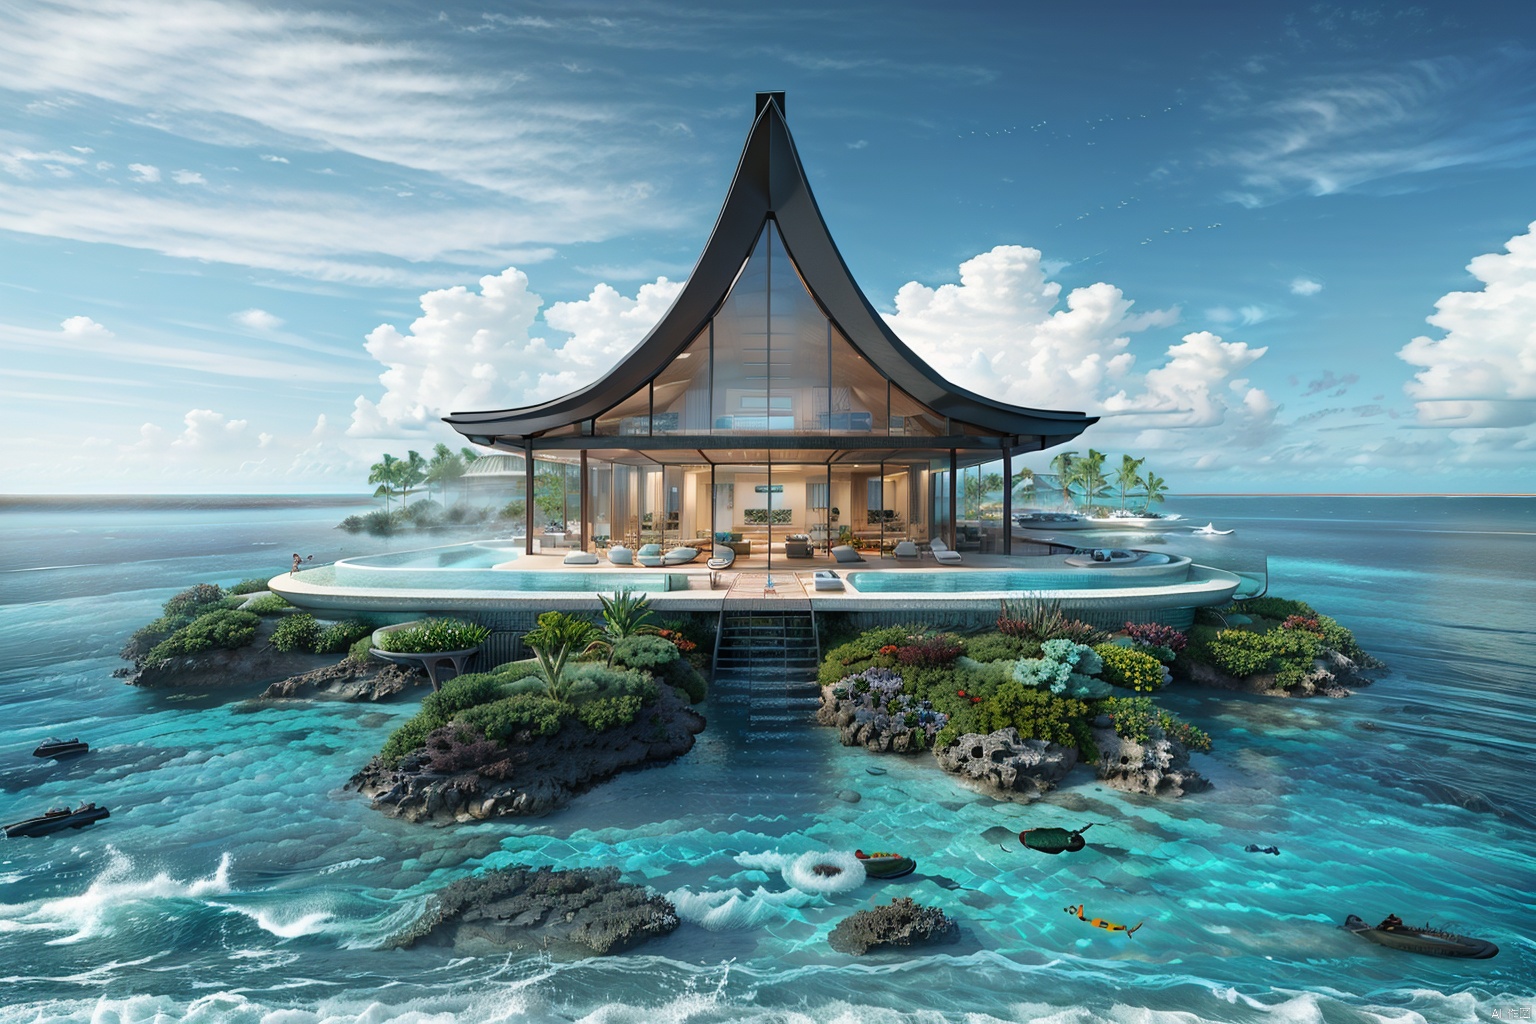  submarine villa,underwater architecture,blue ocean around the villa,amazing architecture, outdoors,bird,flsh,boat,
building,water,scenery,ray tracing,best quality,extreme detail,masterpiece,UHD,16k,wallpaper,poster,film texture,award-winning, dvarchmodern,scenery wallpaper